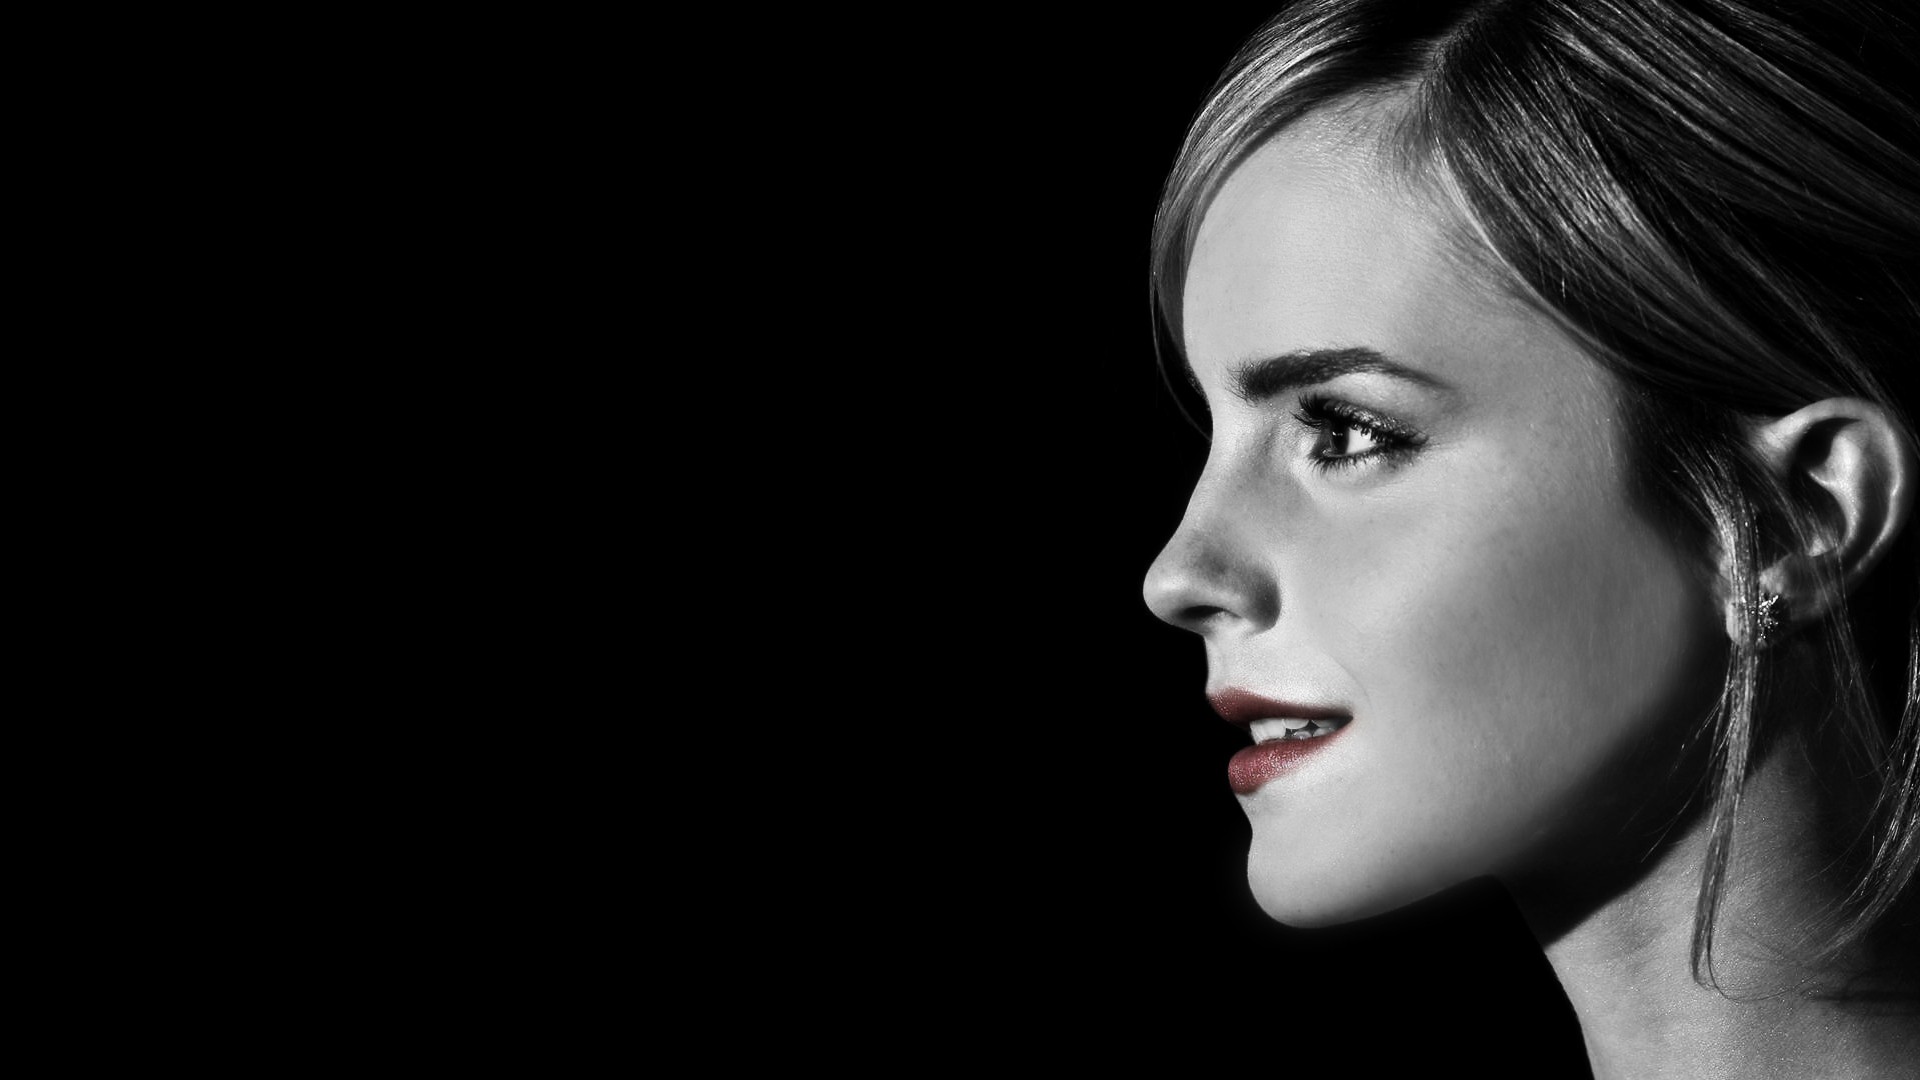 People 1920x1080 Emma Watson women looking away red lipstick face profile selective coloring British women actress simple background black background